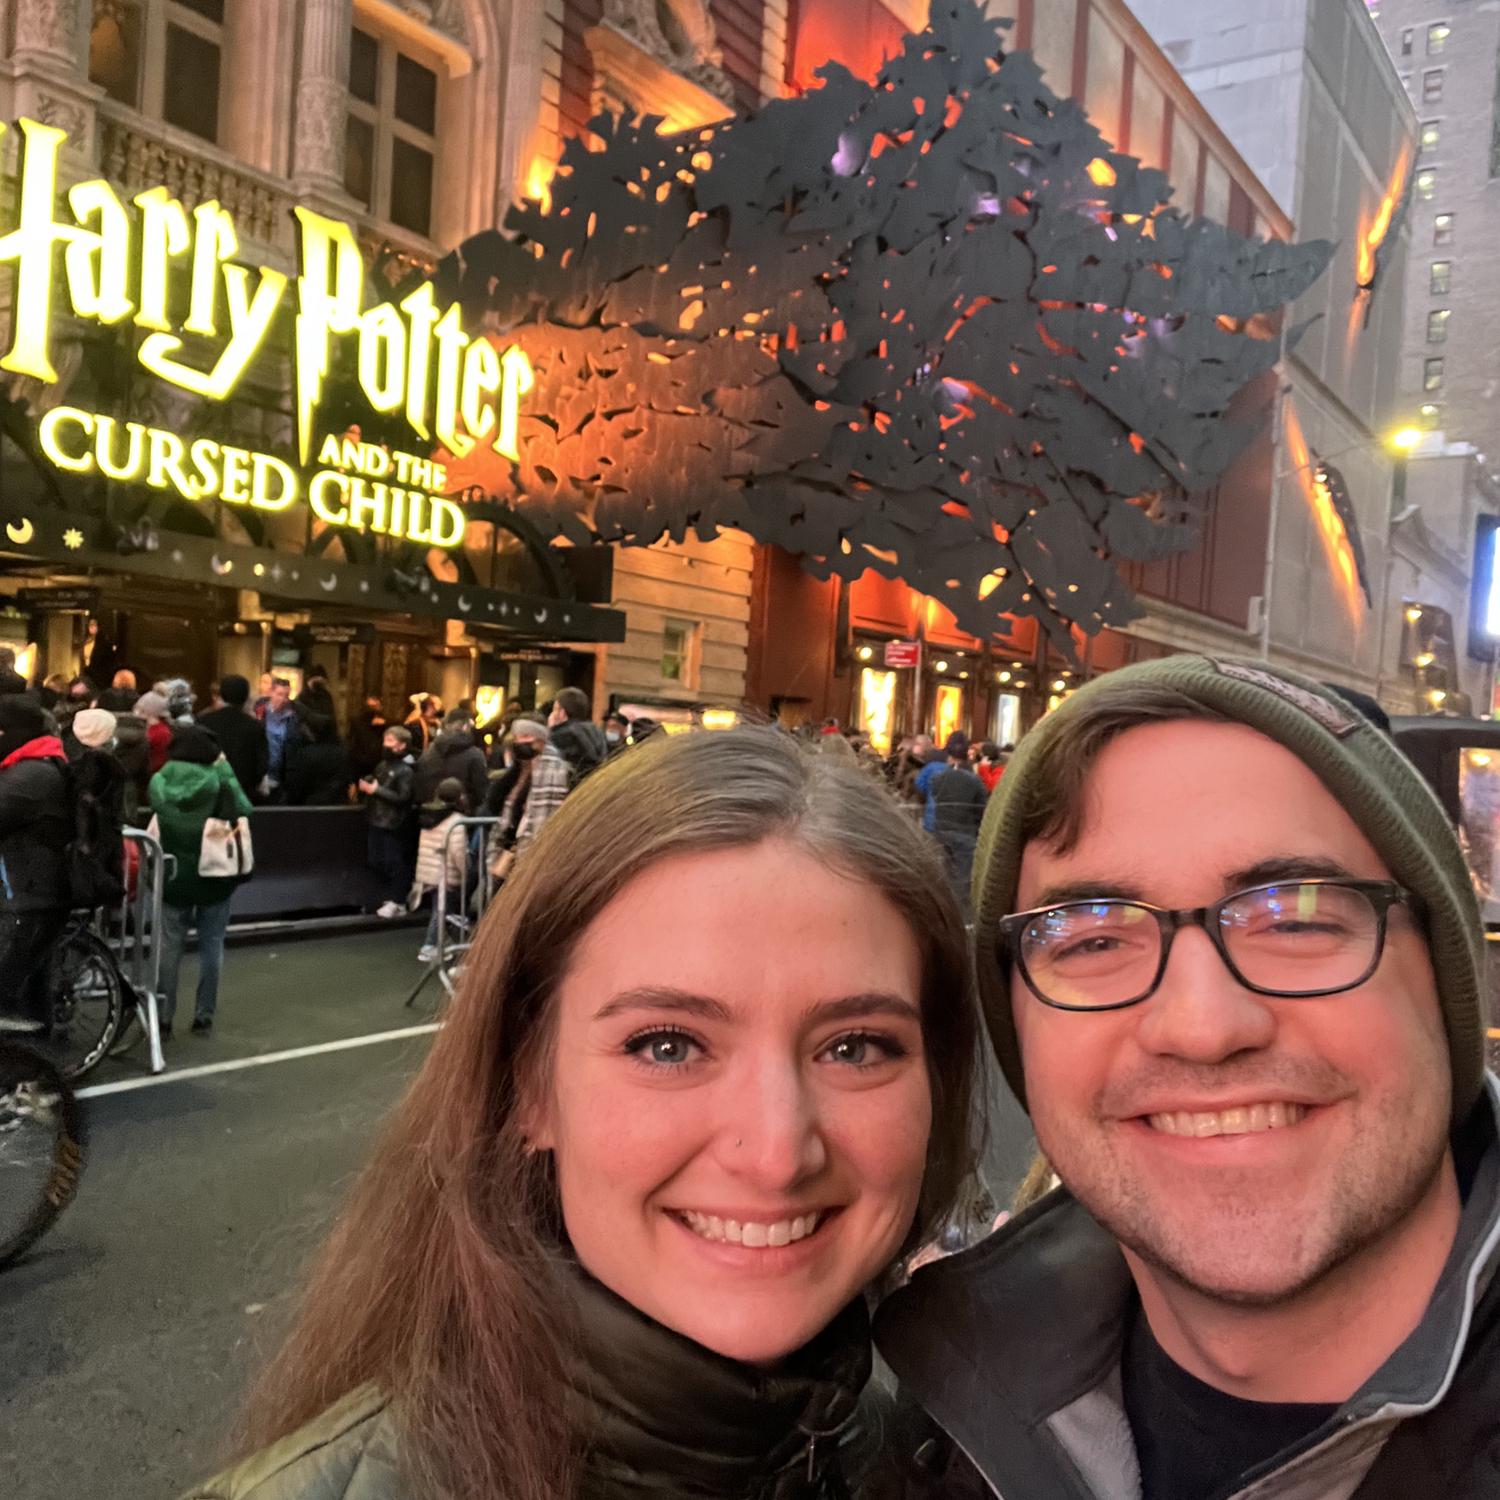 We are two of the biggest Harry Potter nerds and saw it on Broadway in NYC, 2021